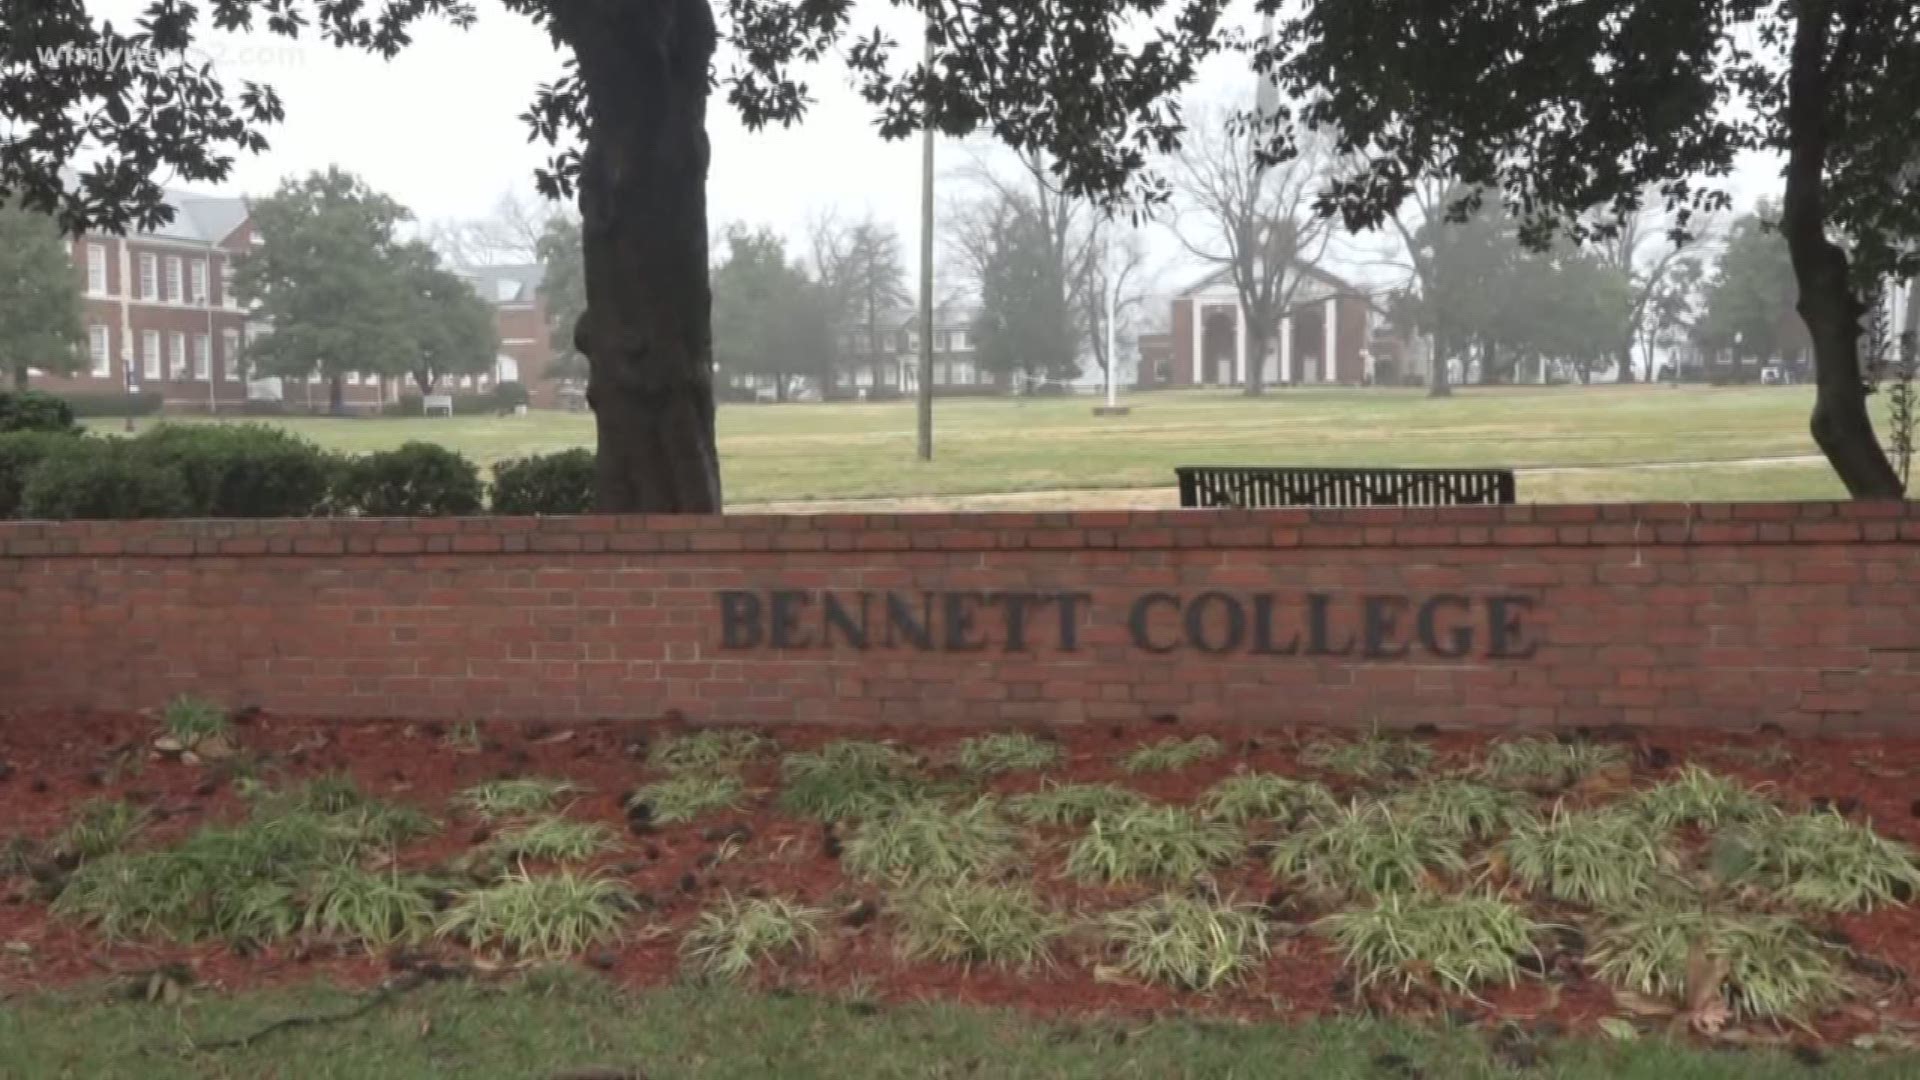 Bennett College has managed to raise over 9 million dollars to save the school. But they’re not out of the woods just yet.